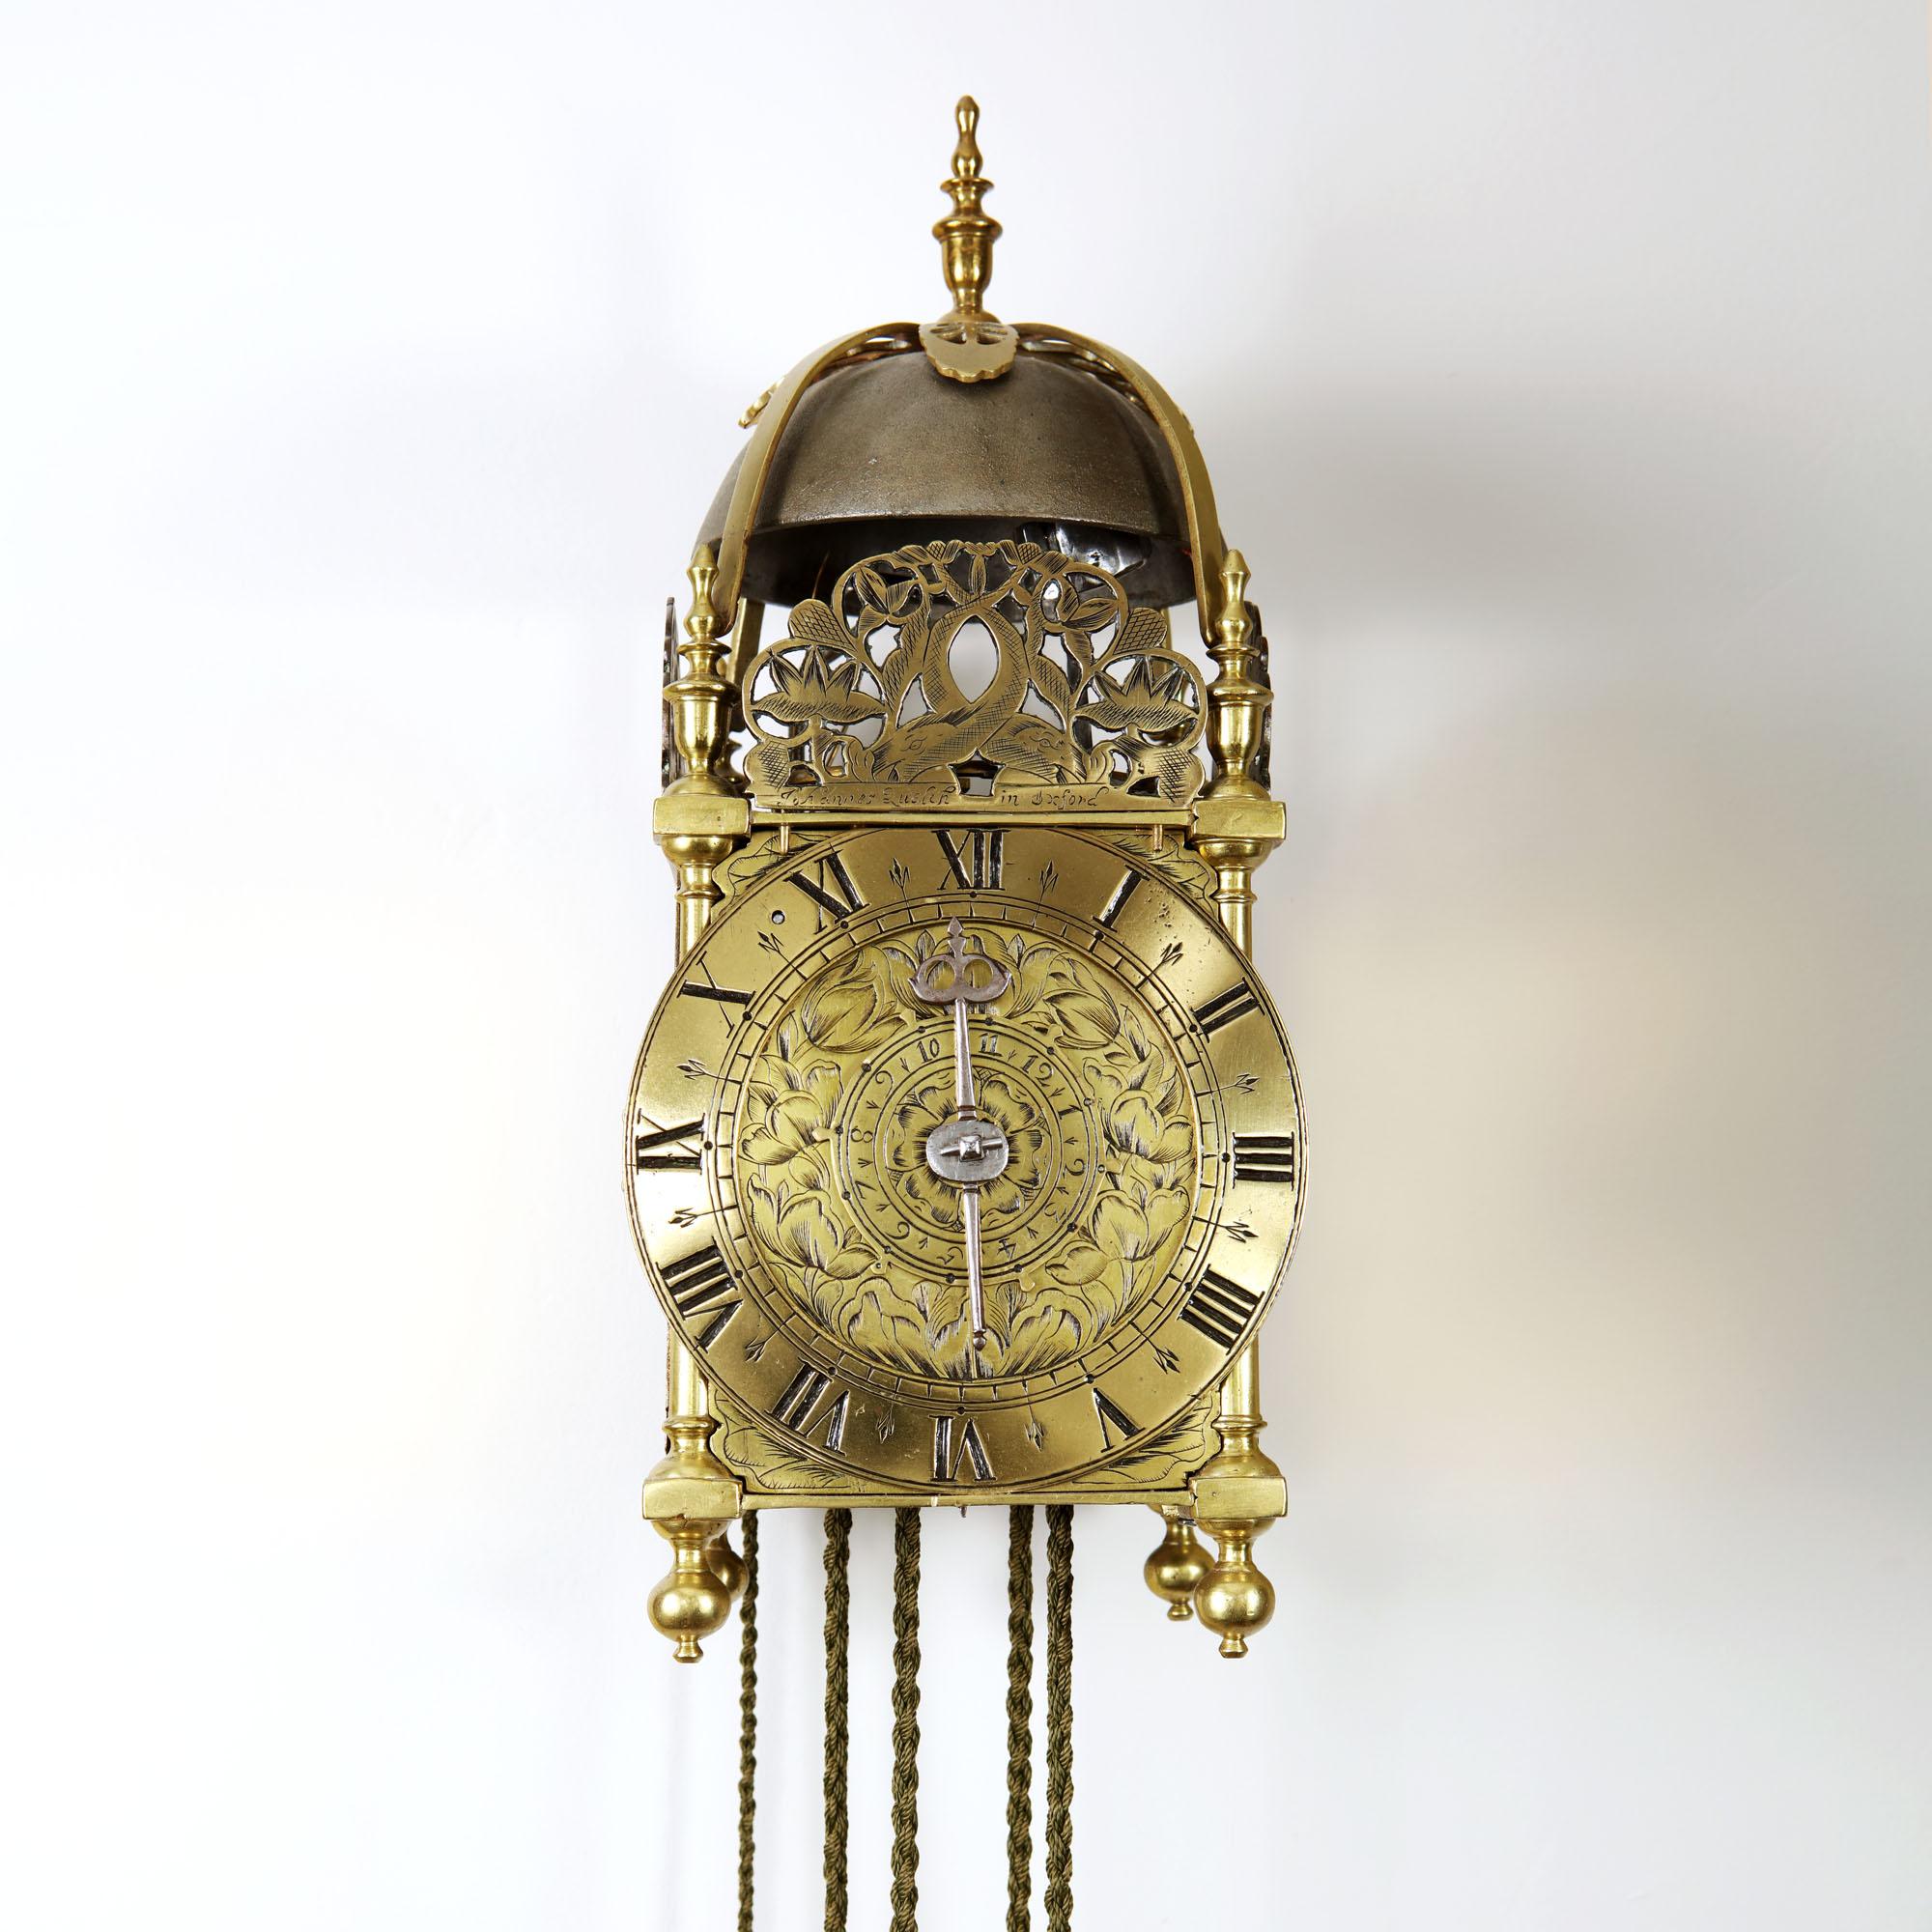 An English 17th century lantern clock made of brass and iron, circa 1665-1670. The clock consists of going and striking trains, as well as an alarm and is driven by lead weights. The front fret shows two engraved dolphins and floral and foliate